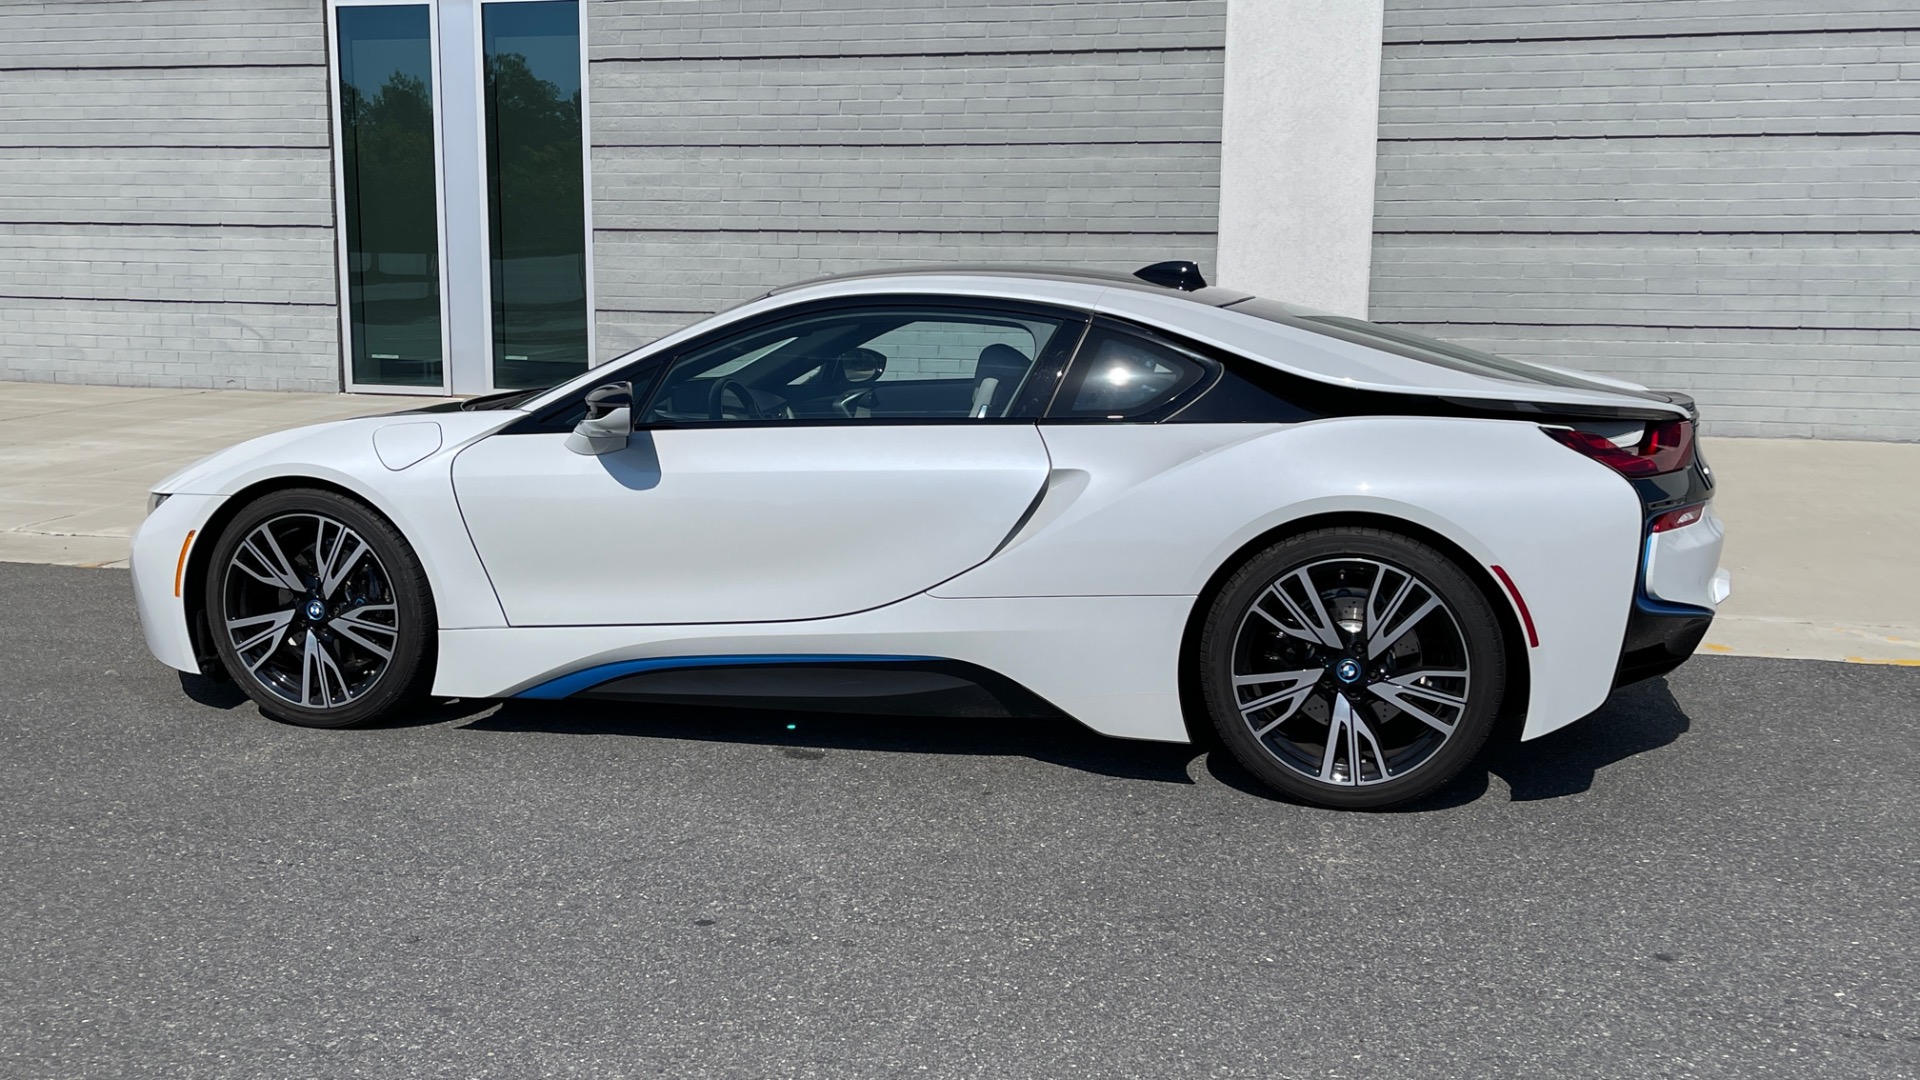 Used 2014 BMW i8 PURE IMPULSE WORLD / BLUE SEATBELTS / PERFORATED LEATHER / LED HEADLIGHTS for sale $75,999 at Formula Imports in Charlotte NC 28227 6